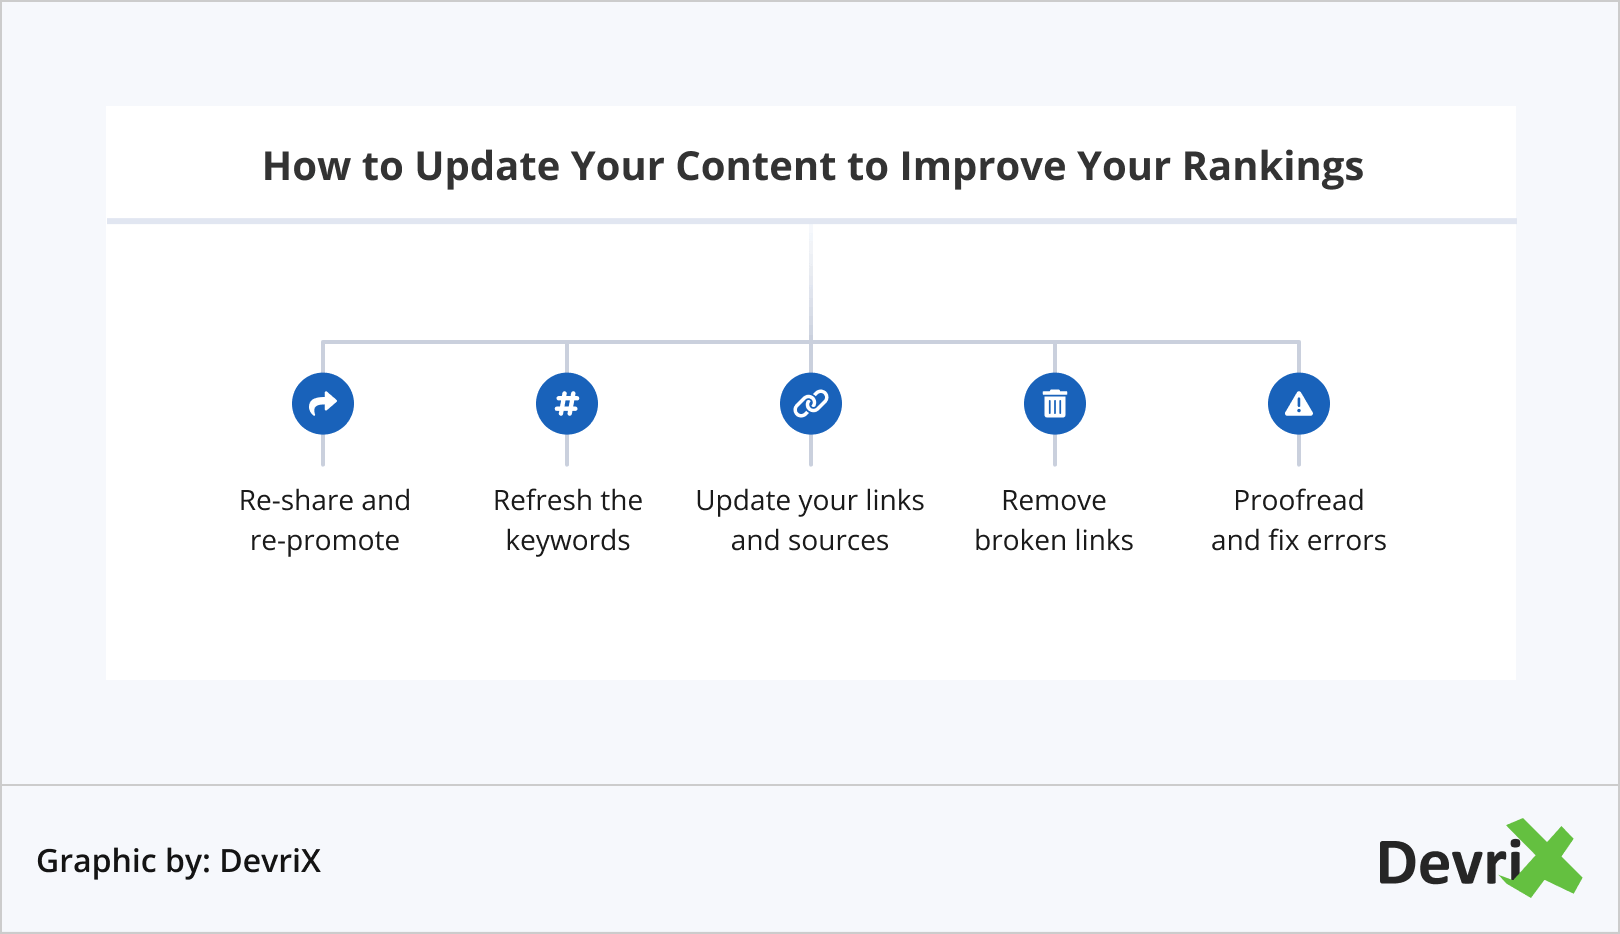 How to Update Your Content to Improve Your Rankings